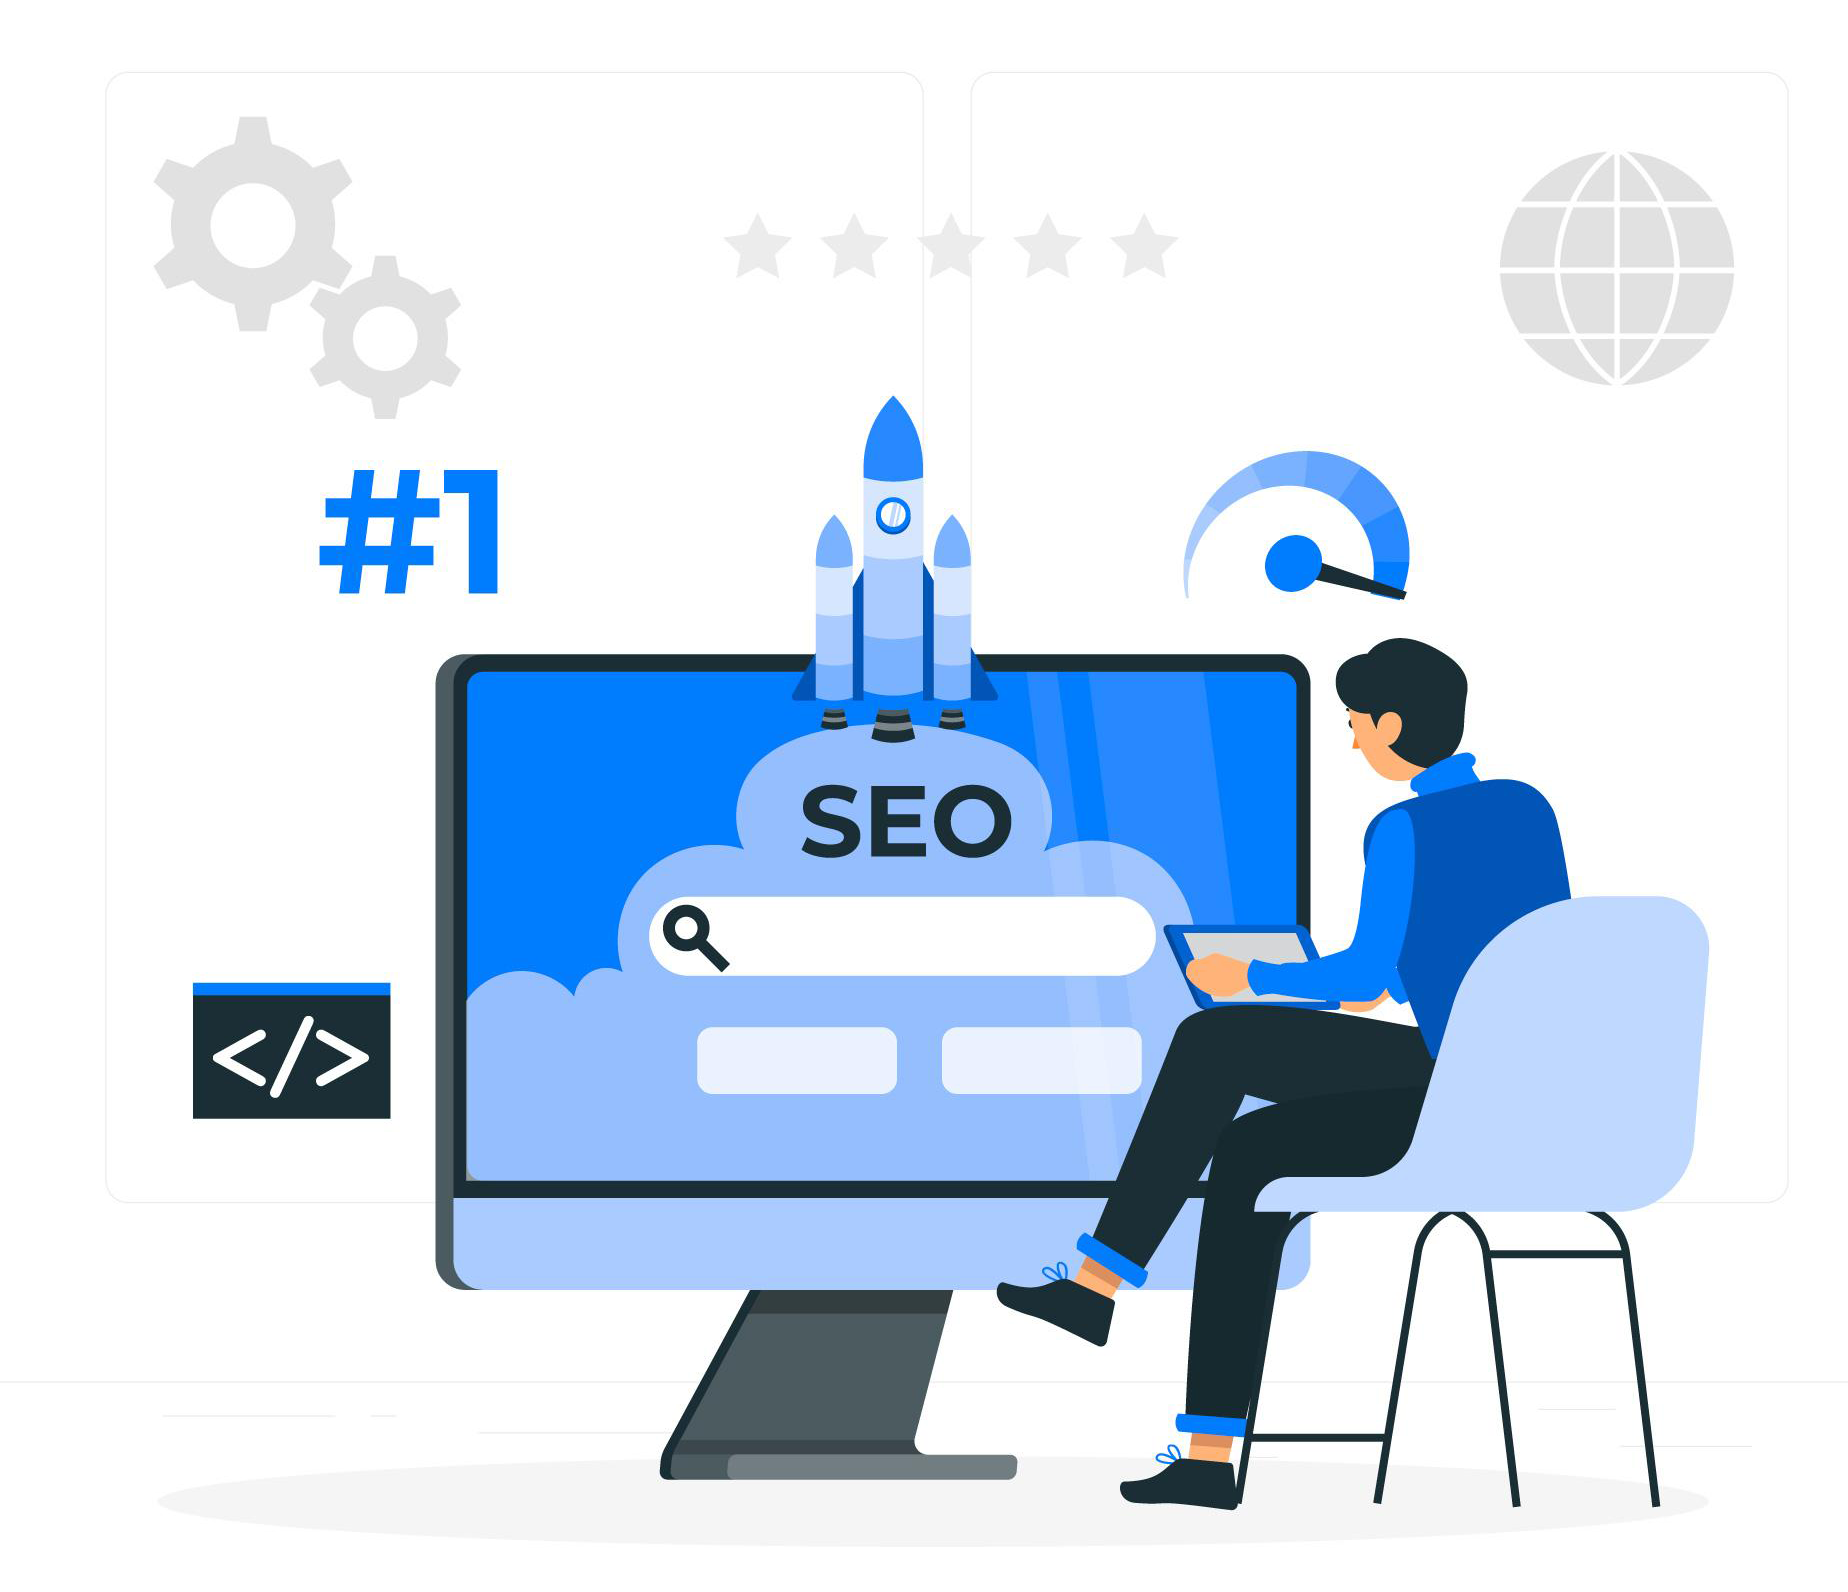 TAIBA Creations SEO Services To Help You Achieve Greater Visibility Online